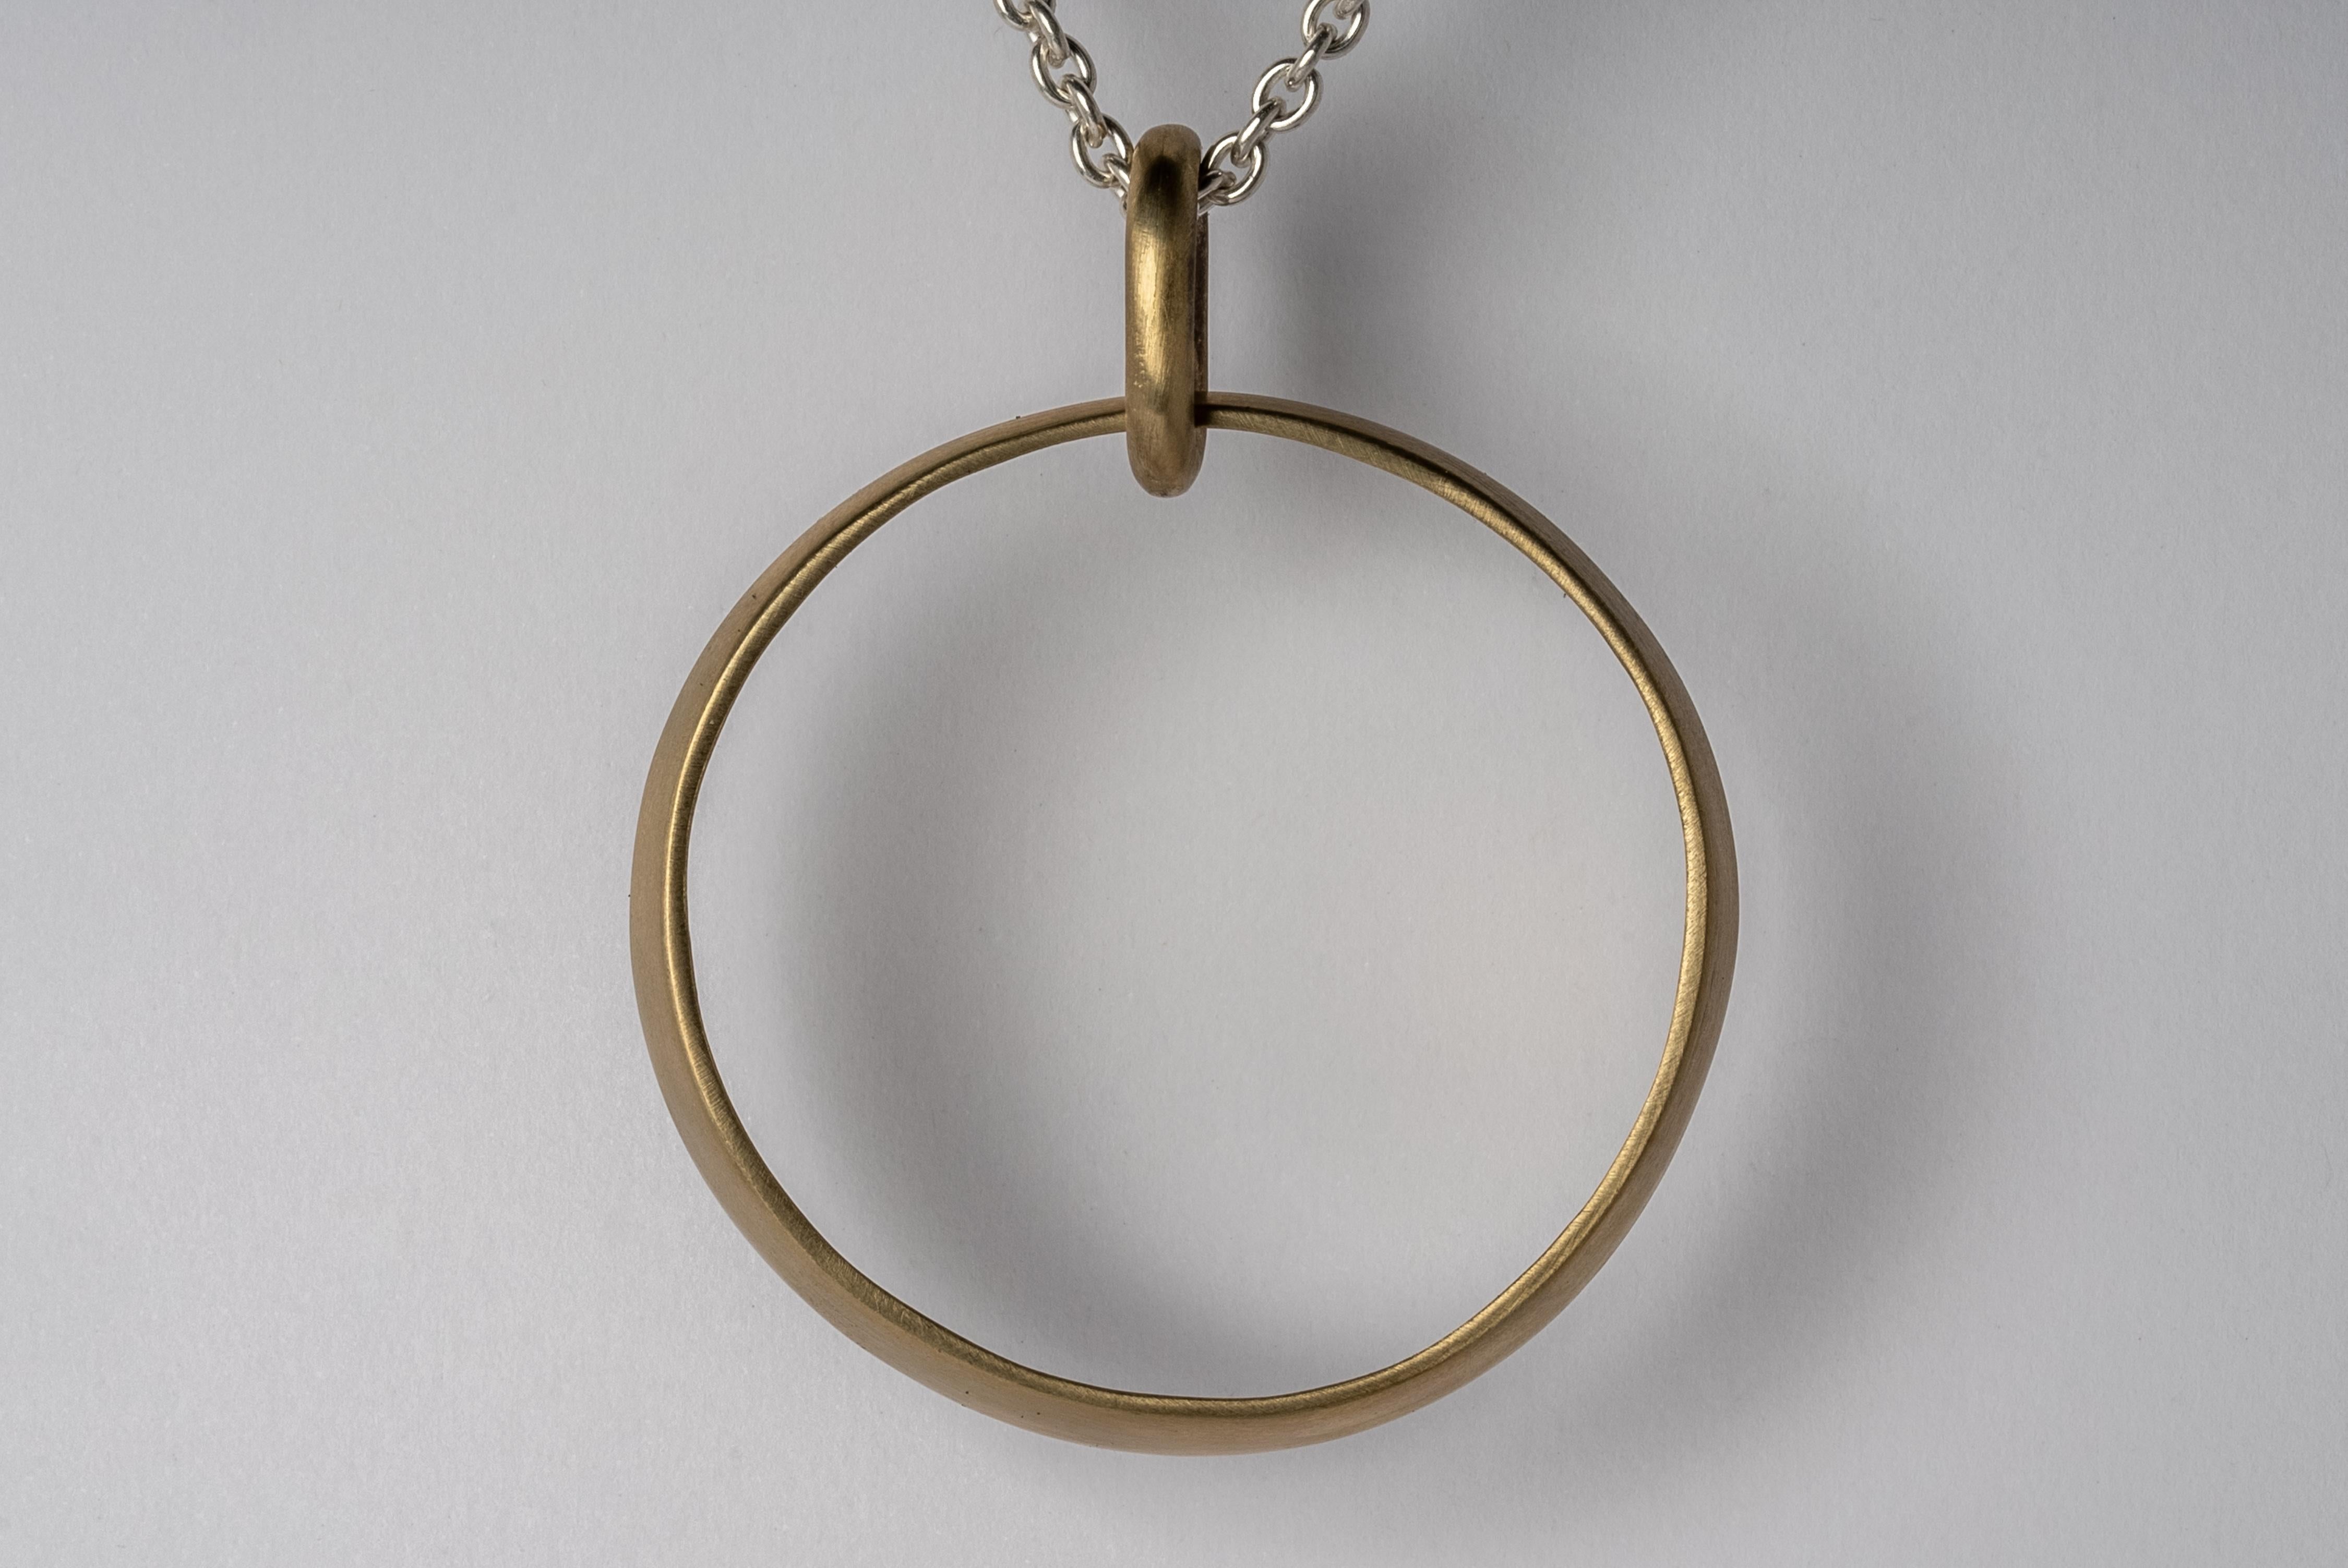 Pendant necklace in the shape of sphere in brass, it comes on a 74cm sterling silver chain.